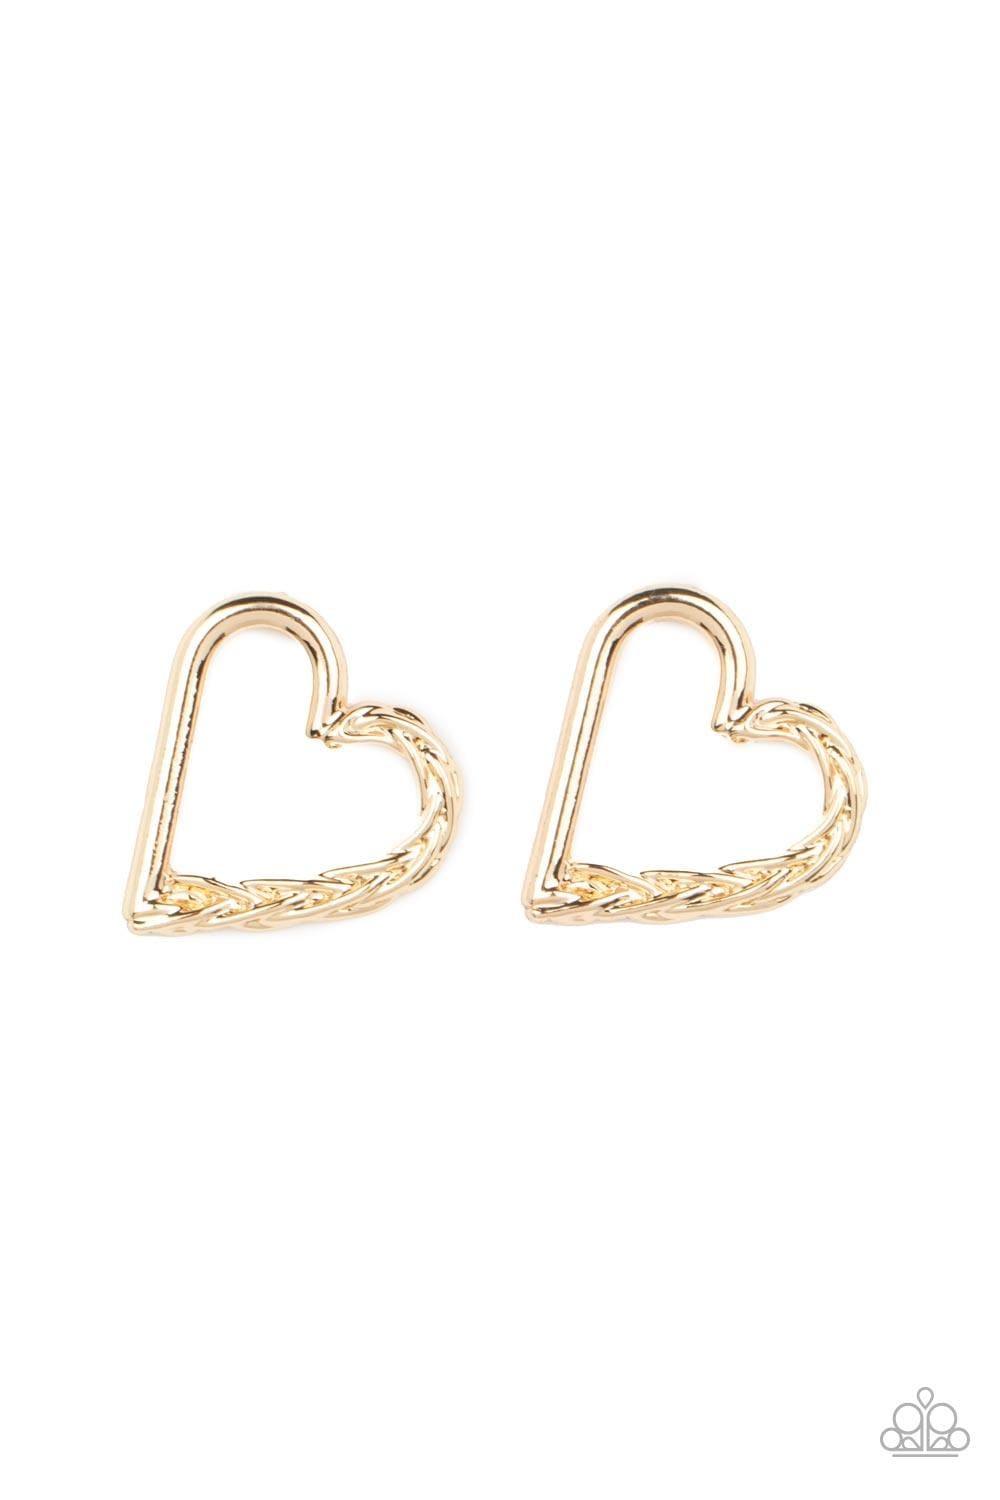 Paparazzi Accessories - Cupid, Who? - Gold Heart Post Earring - Bling by JessieK